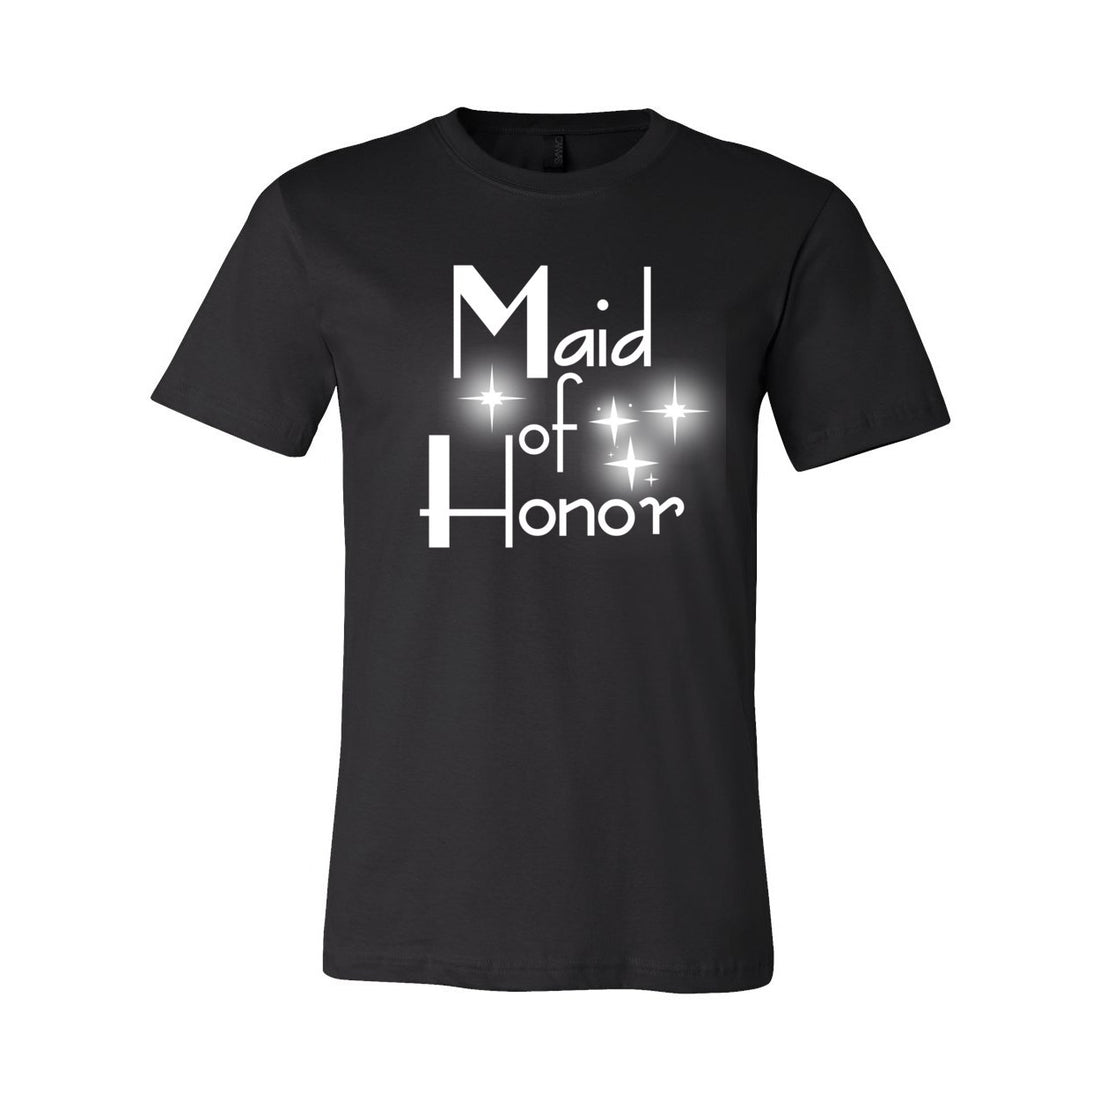 #6 Sparkle Maid of Honor Short Sleeve Jersey Tee - T-Shirts - Positively Sassy - #6 Sparkle Maid of Honor Short Sleeve Jersey Tee